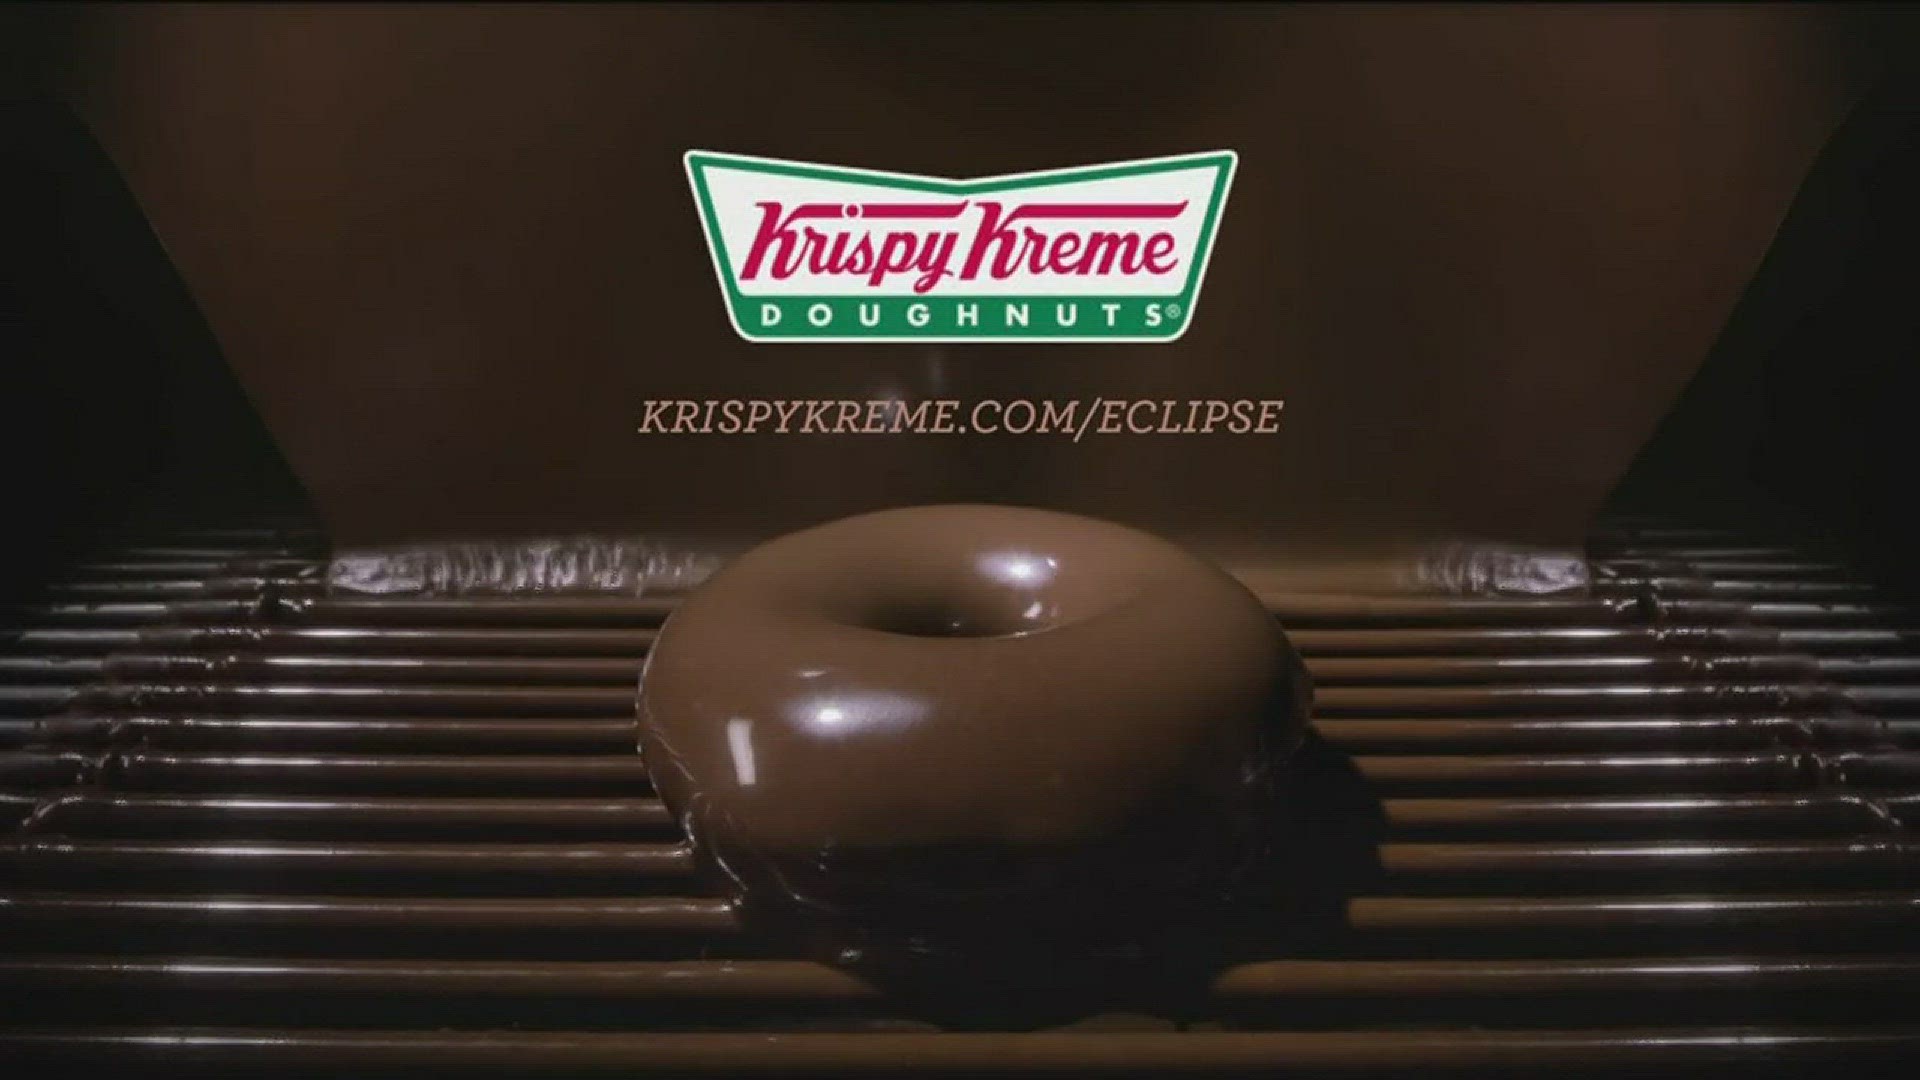 For the first time, Krispy Kreme's trademark glazed donuts will be "eclipsed" with chocolate.